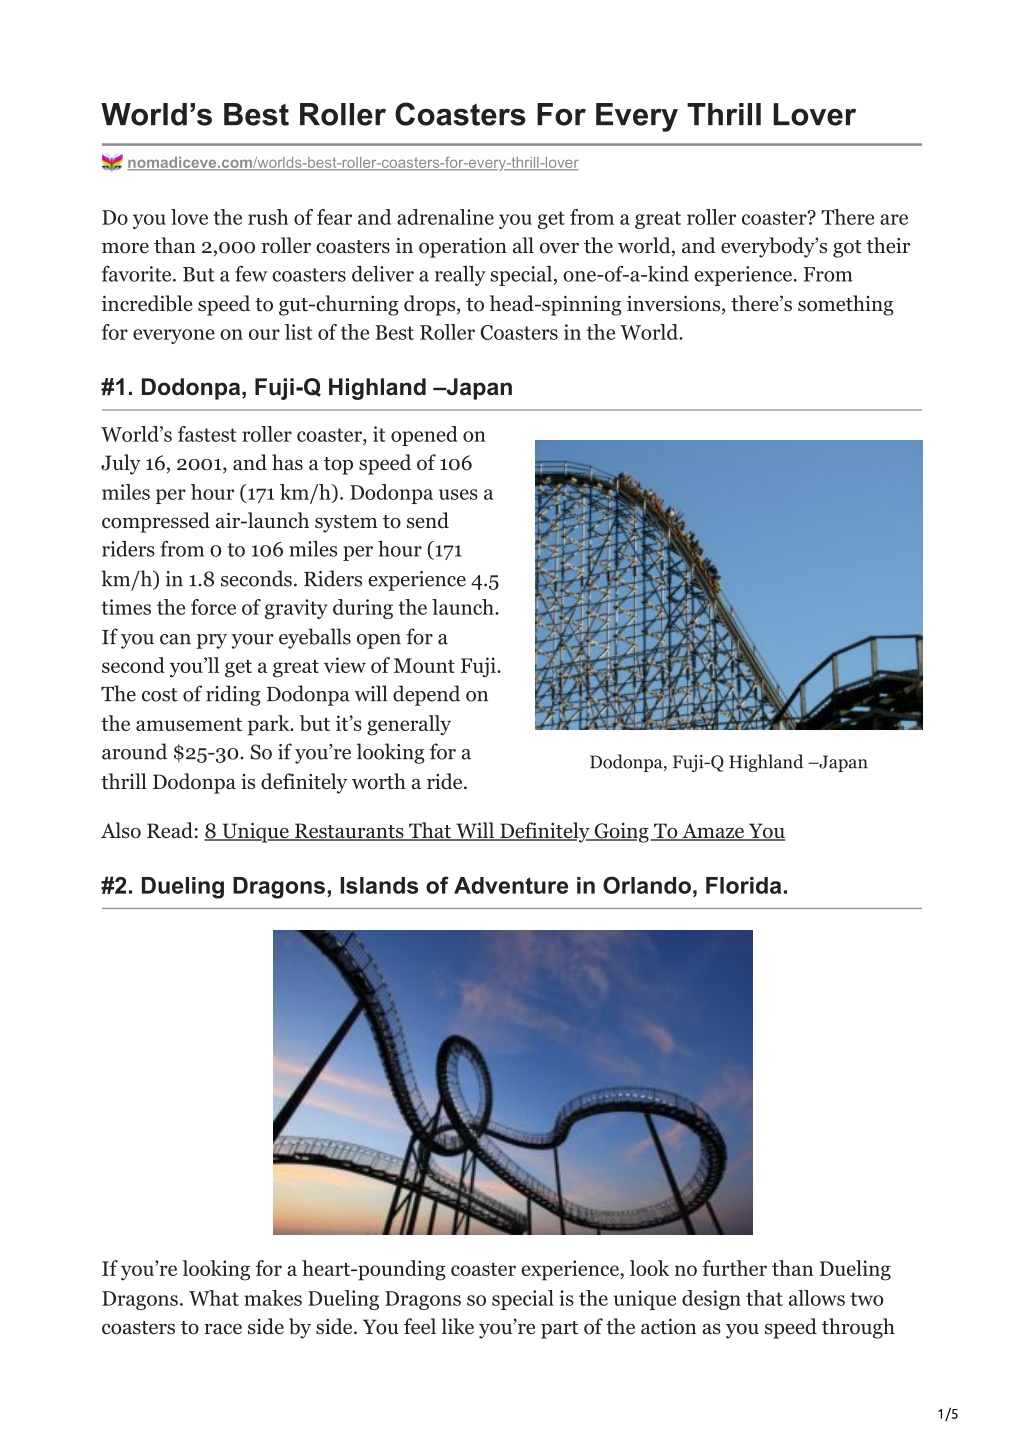 PPT - Worlds Best Roller Coasters For Every Thrill Lover PowerPoint ...